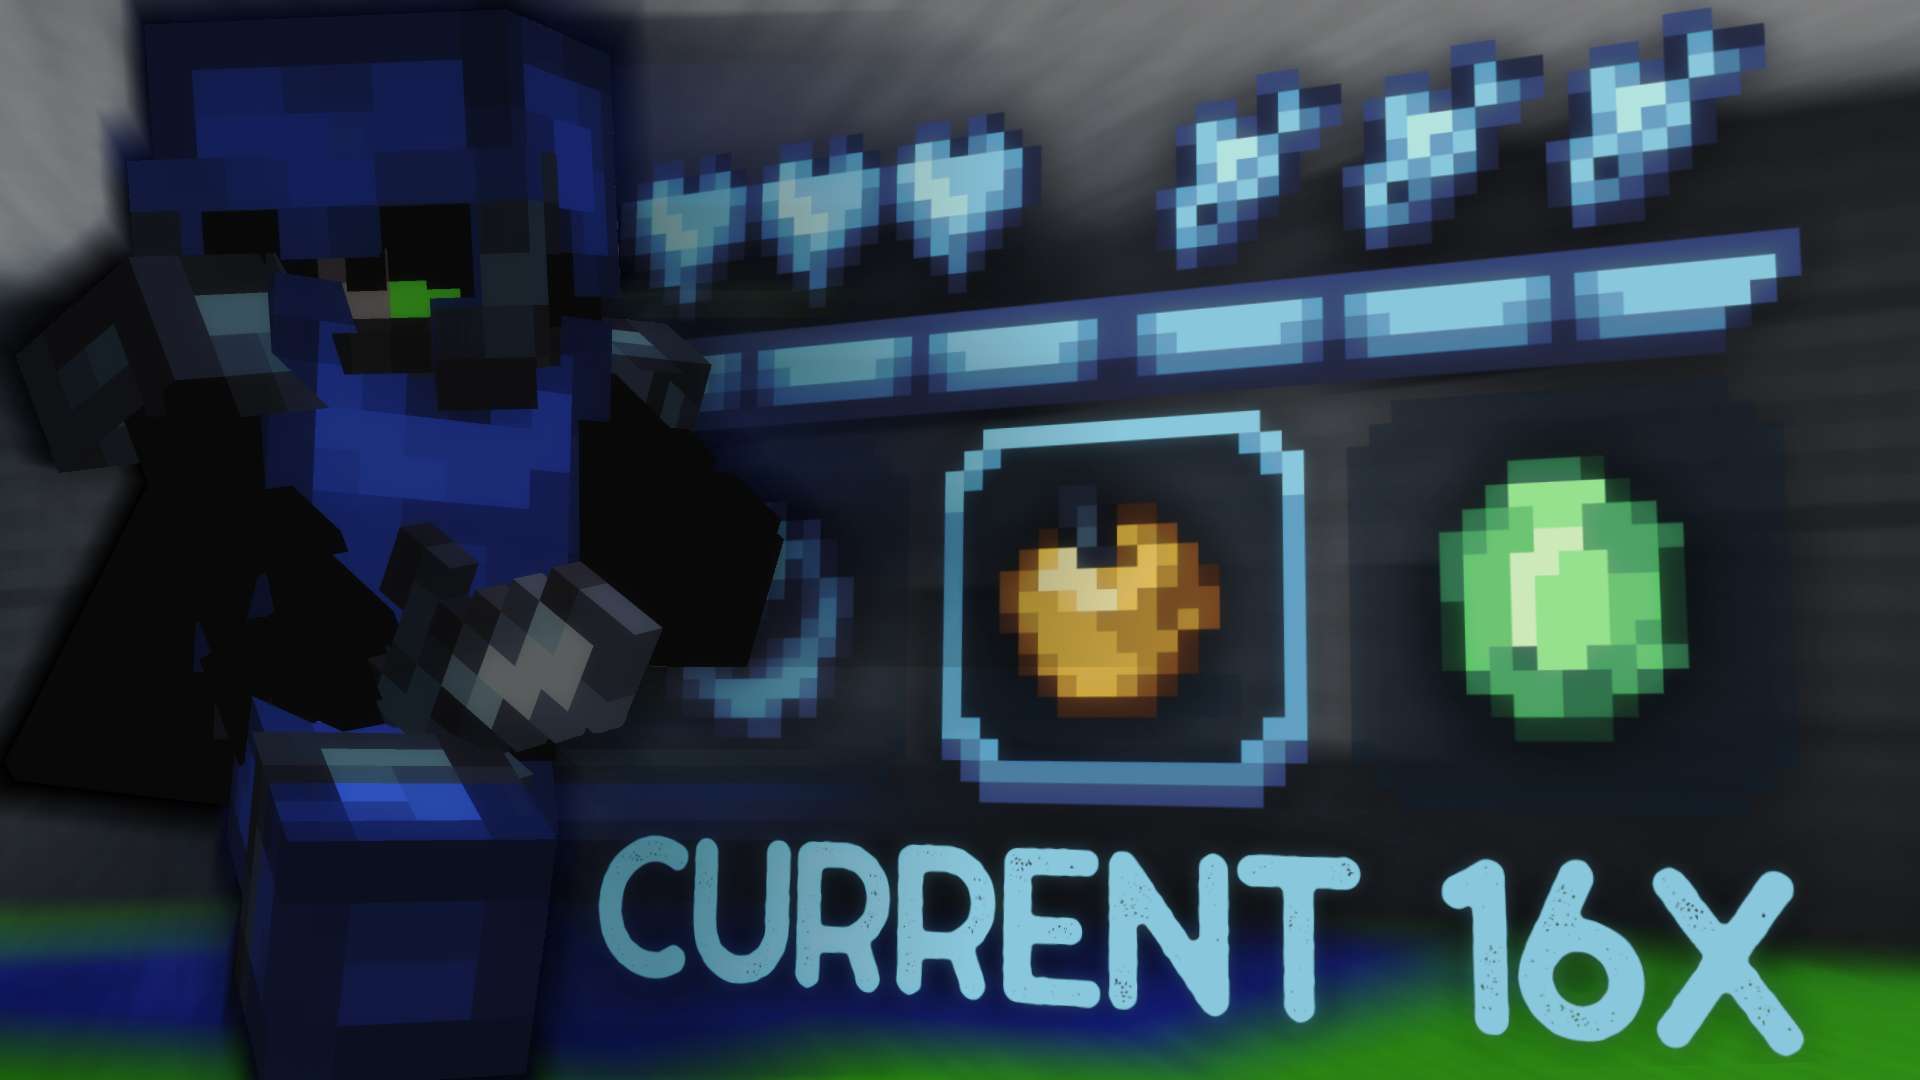 CURRENT [SHORT] 16x by didms on PvPRP